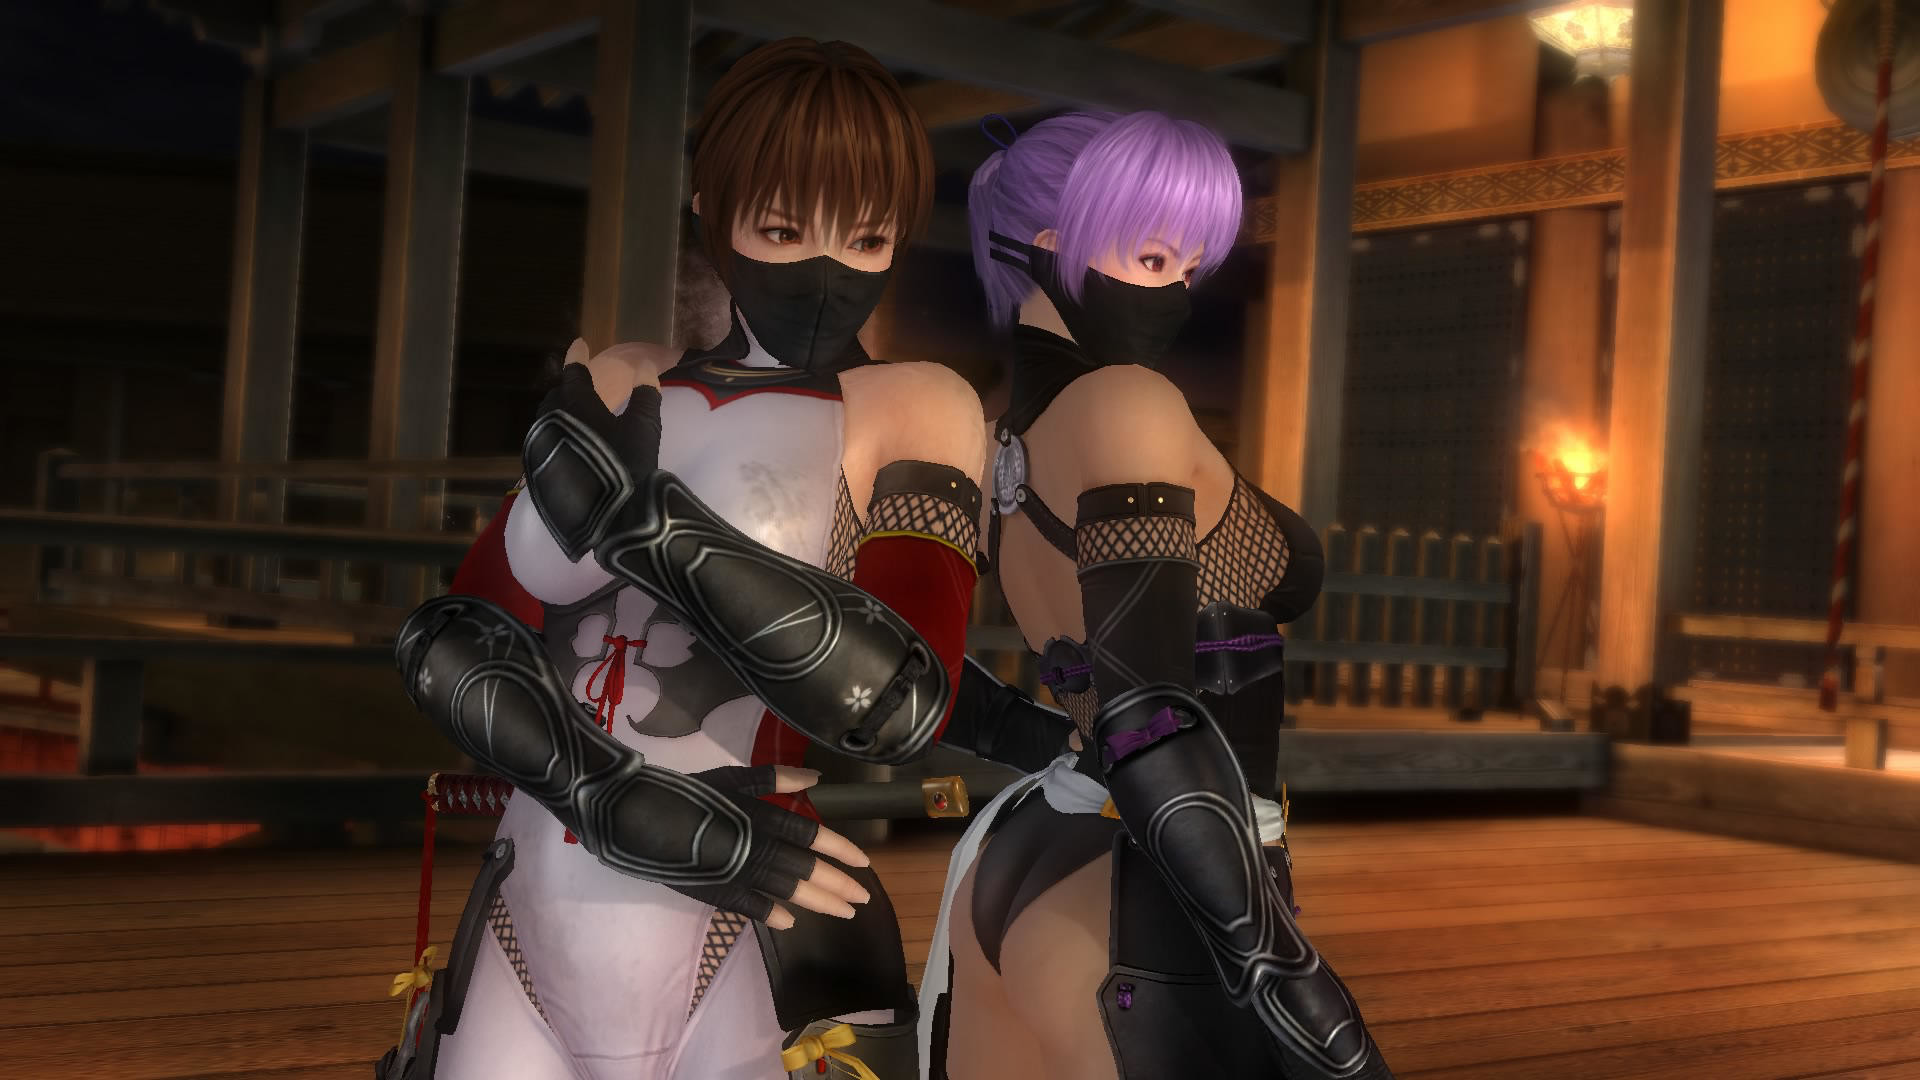 1920x1080 ... DEAD OR ALIVE 5 Last Round:Kasumi and Ayane tag by Kabukiart157